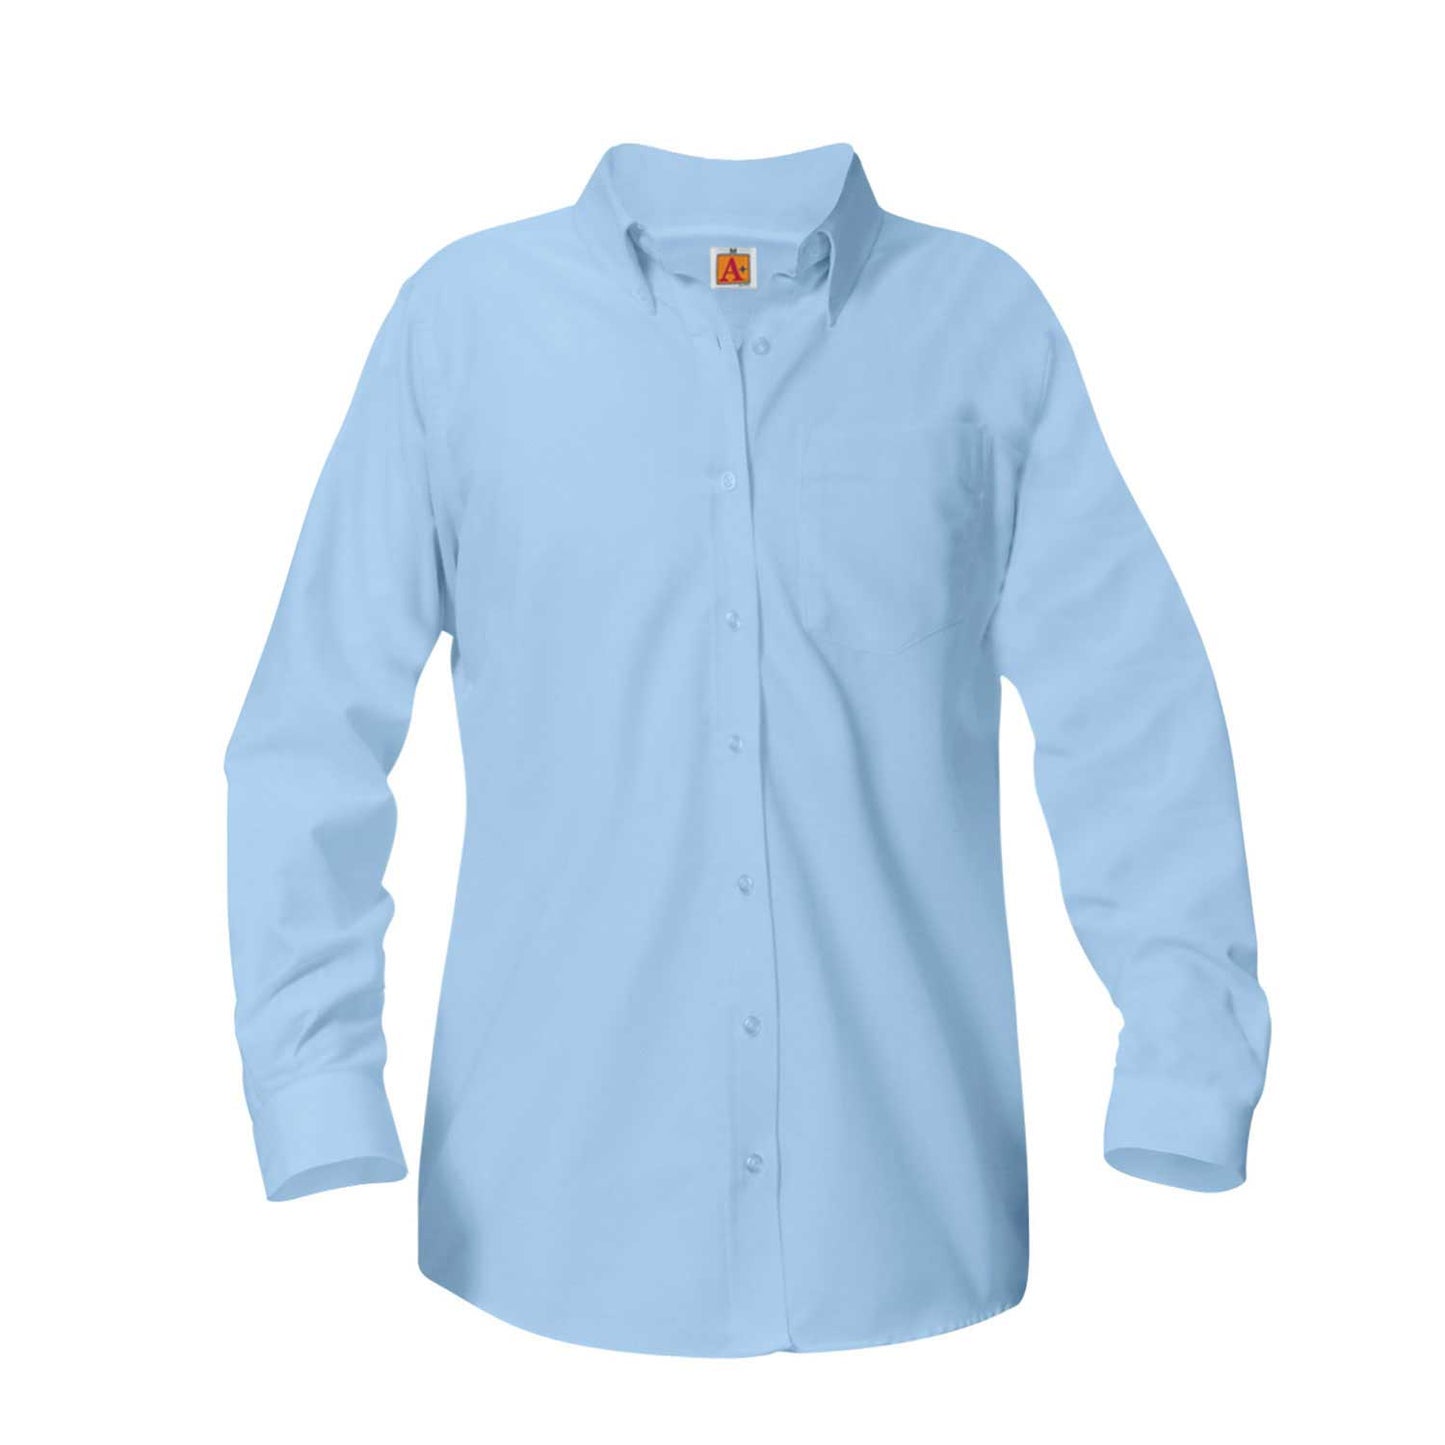 Youth Girls Long Sleeve Oxford Blouse